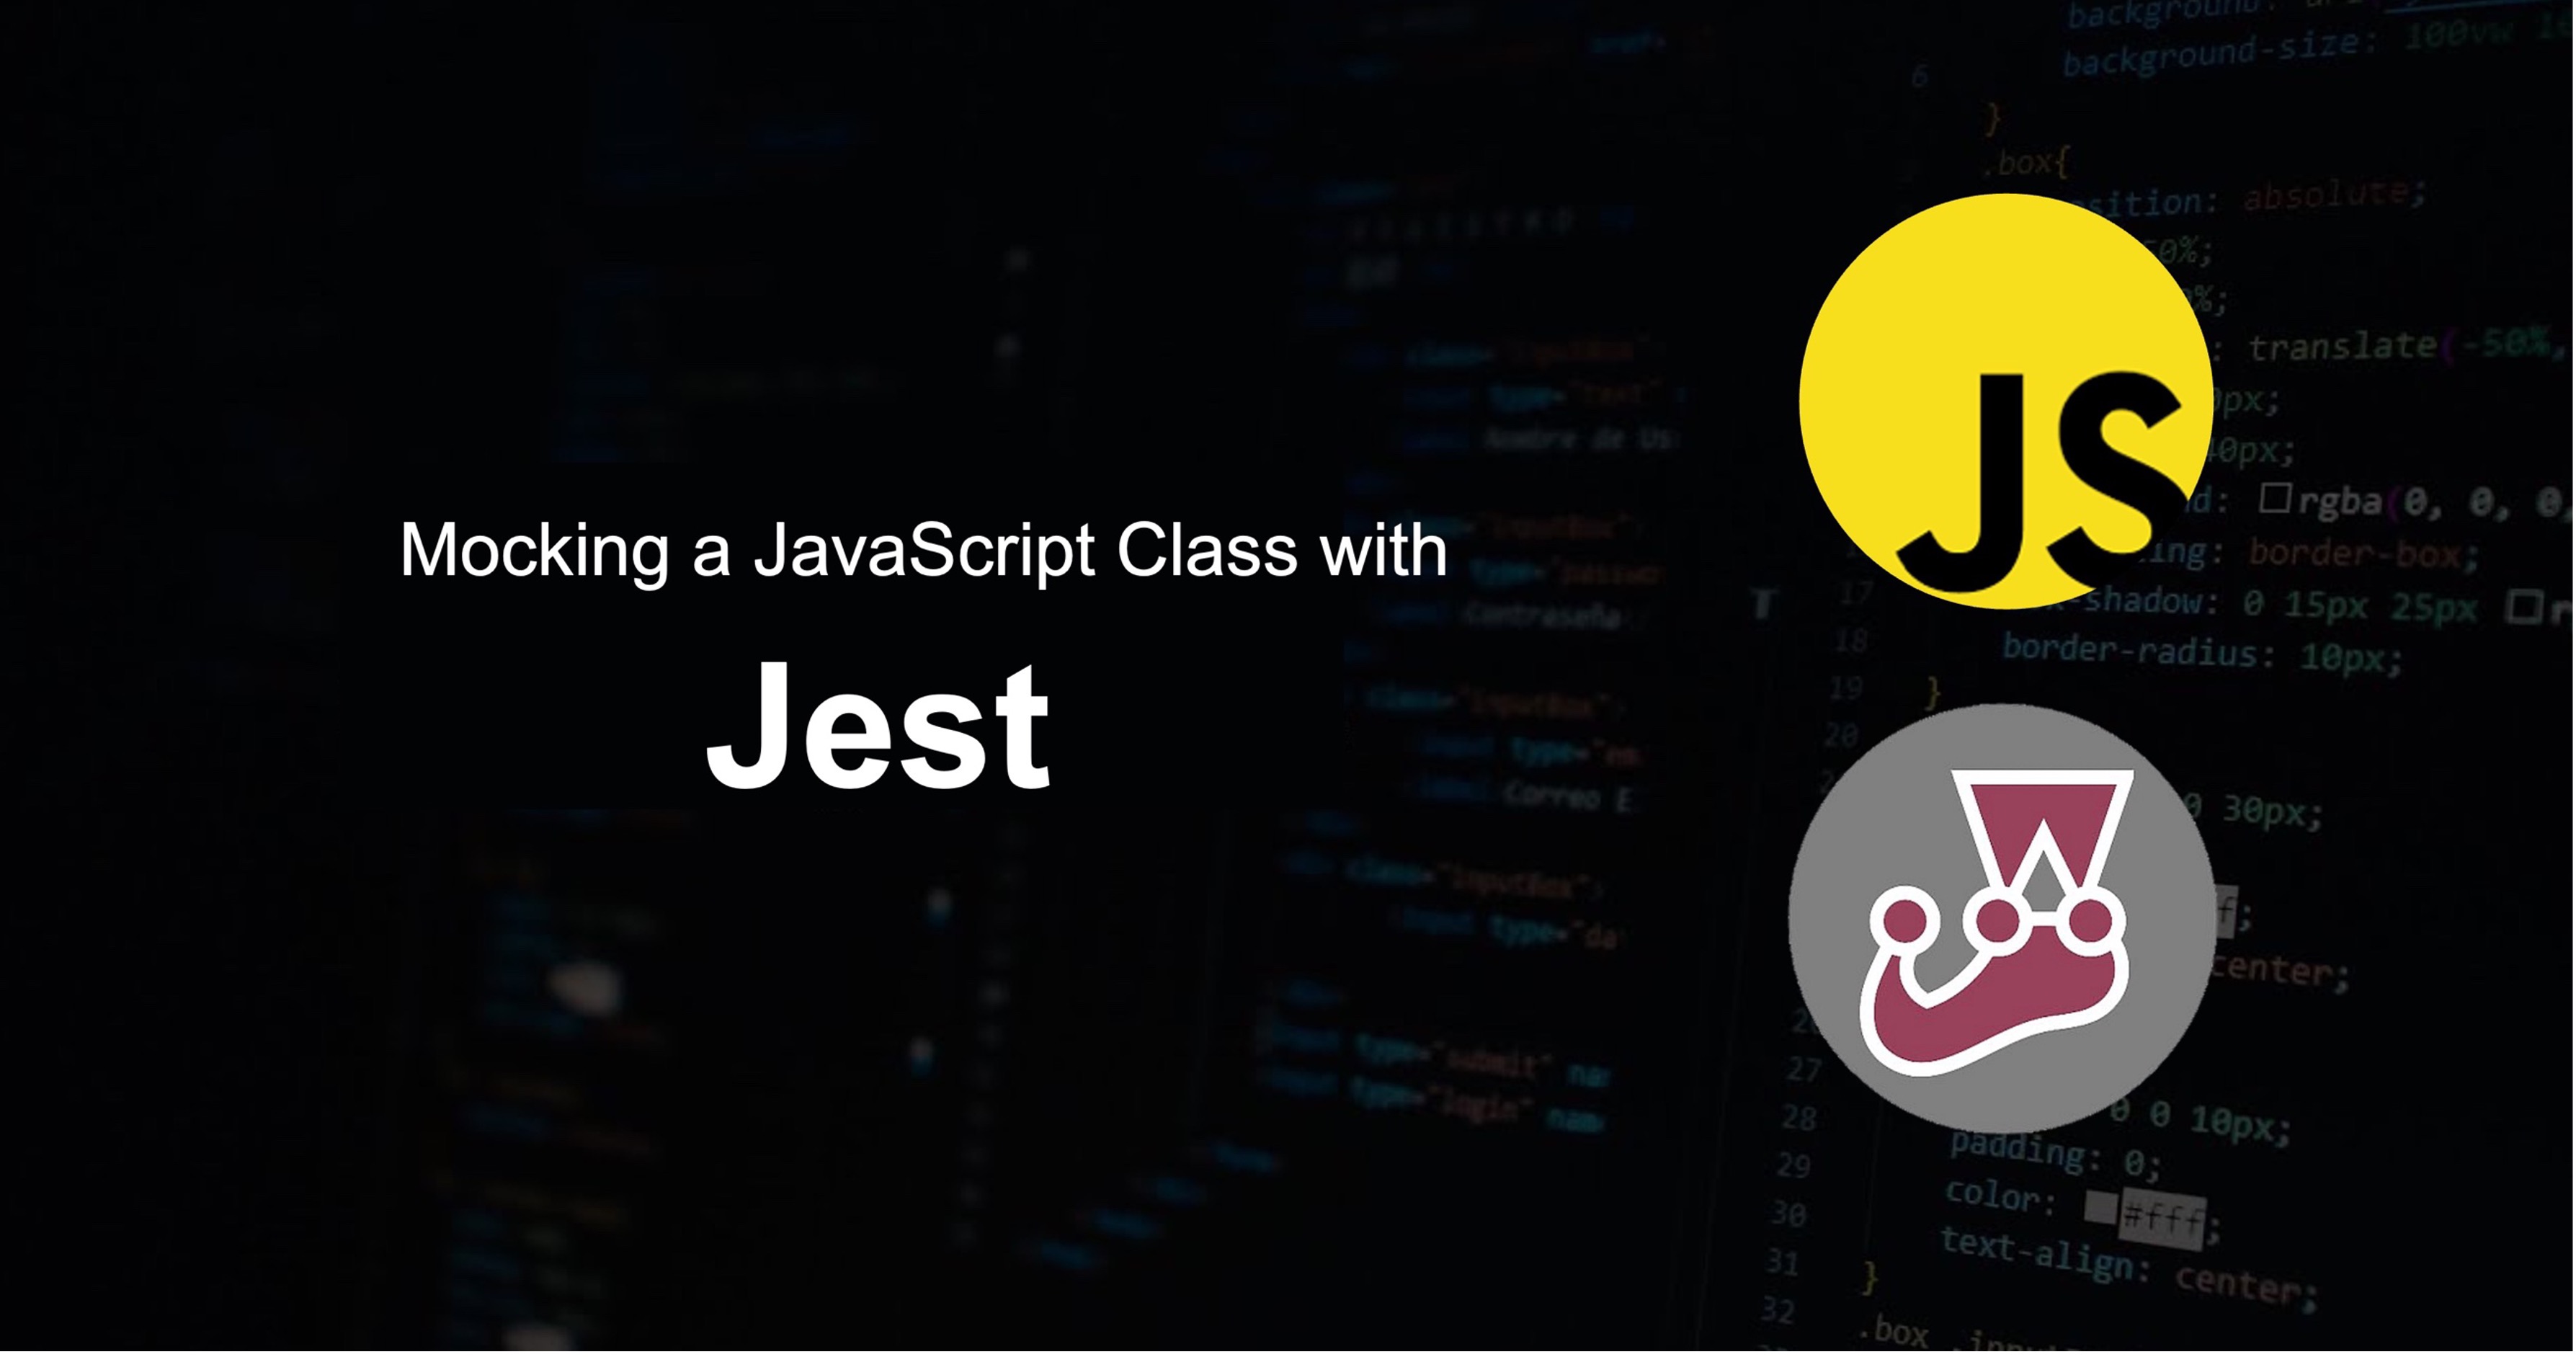 Text on a black background saying Mocking a JavaScript Class with Jest beside the logos of JavaScript and Jest